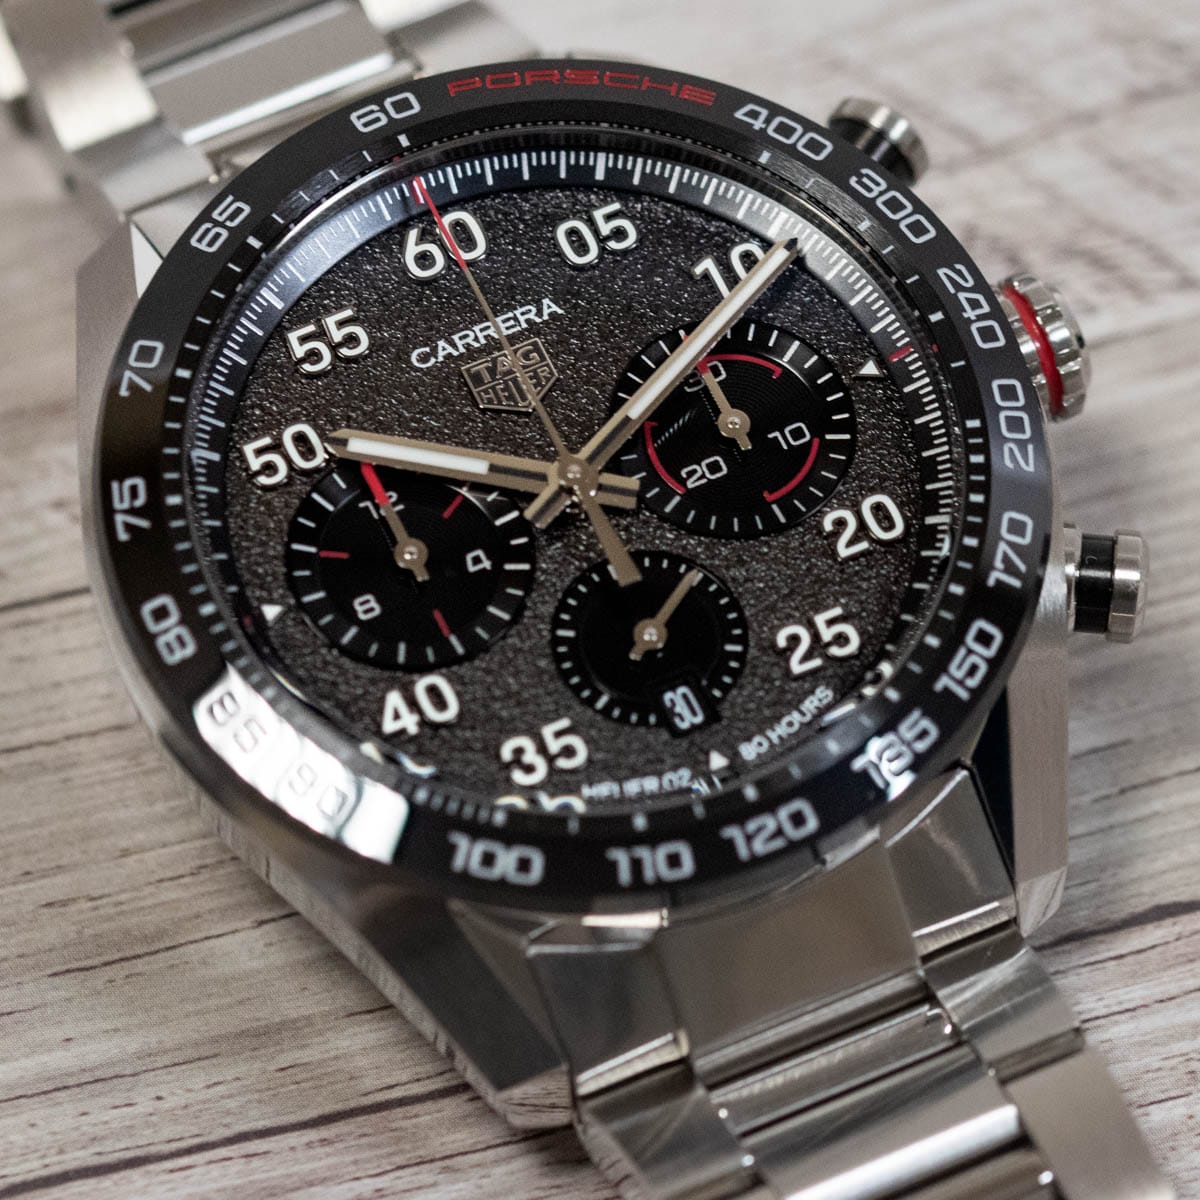 Stylied photo of  of Carrera 'Porsche' Heuer 02 Chronograph